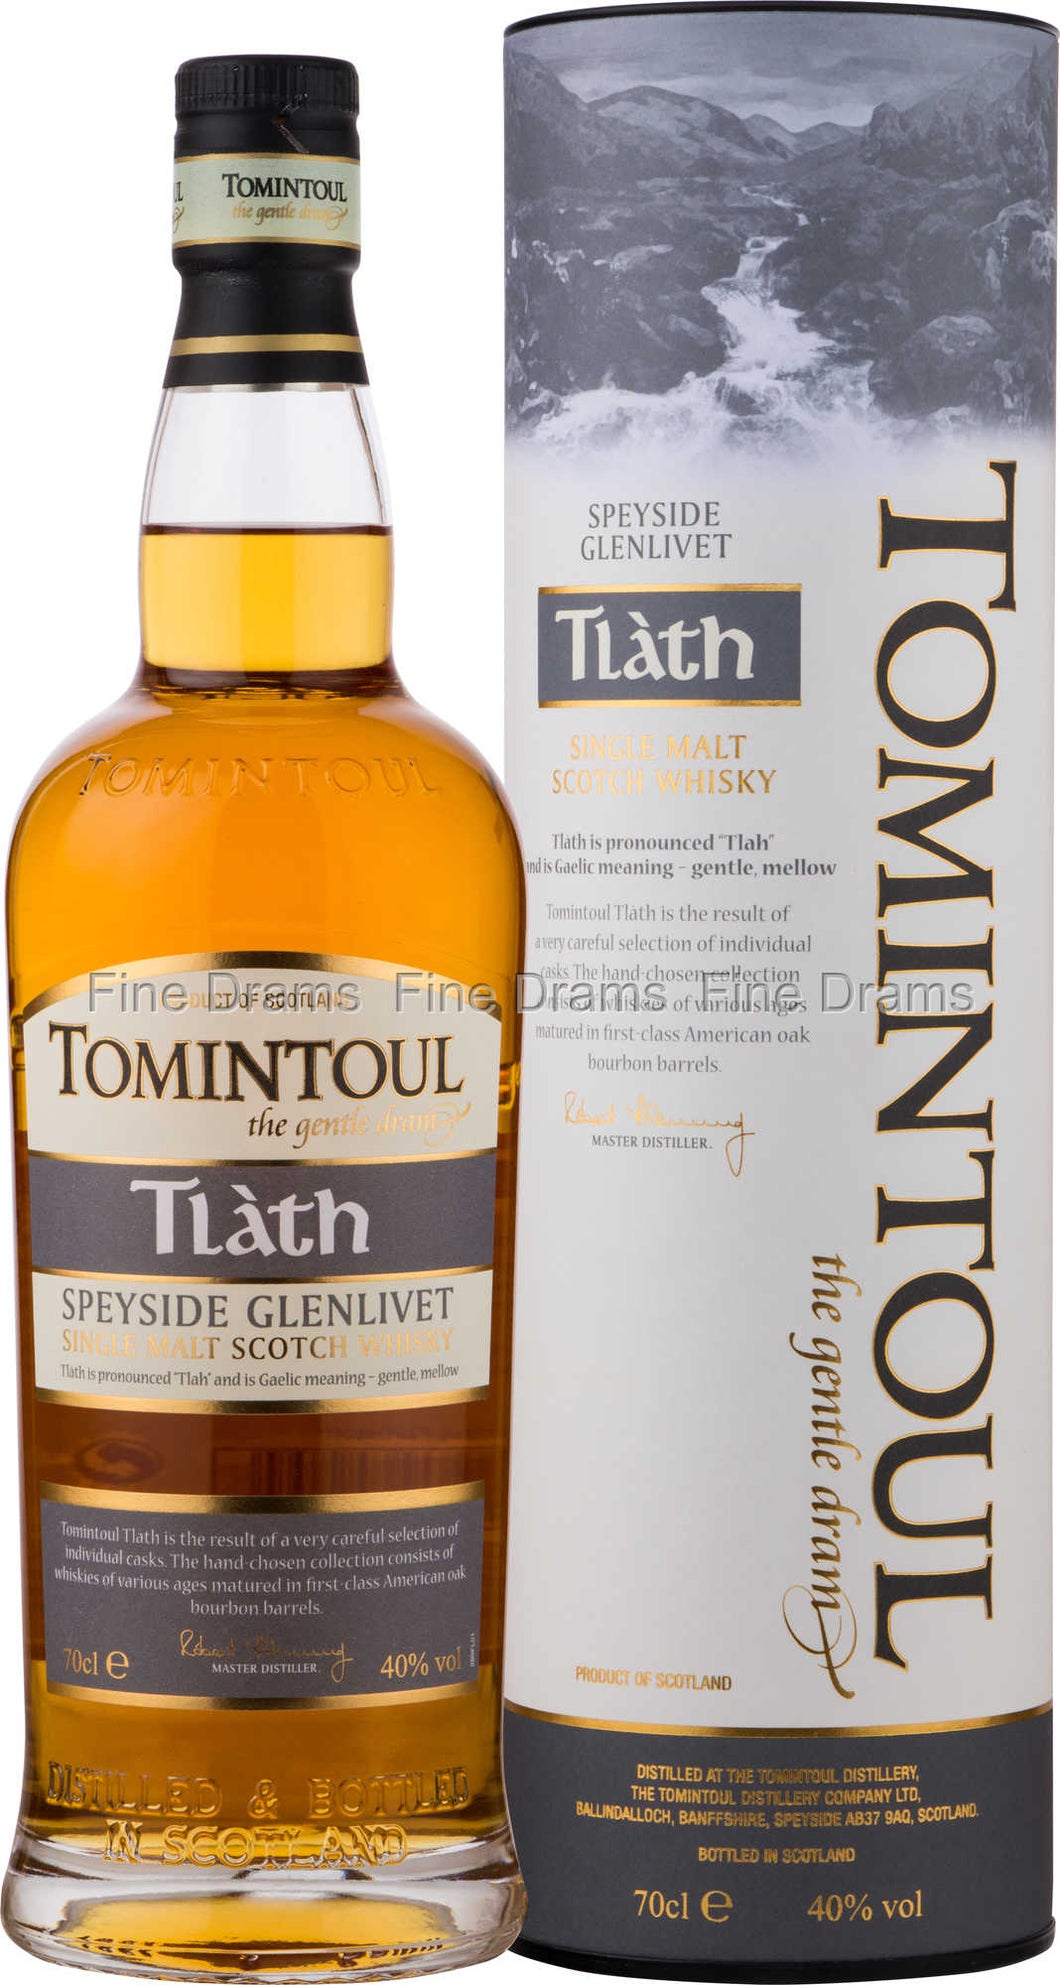 Tomintoul Tlath